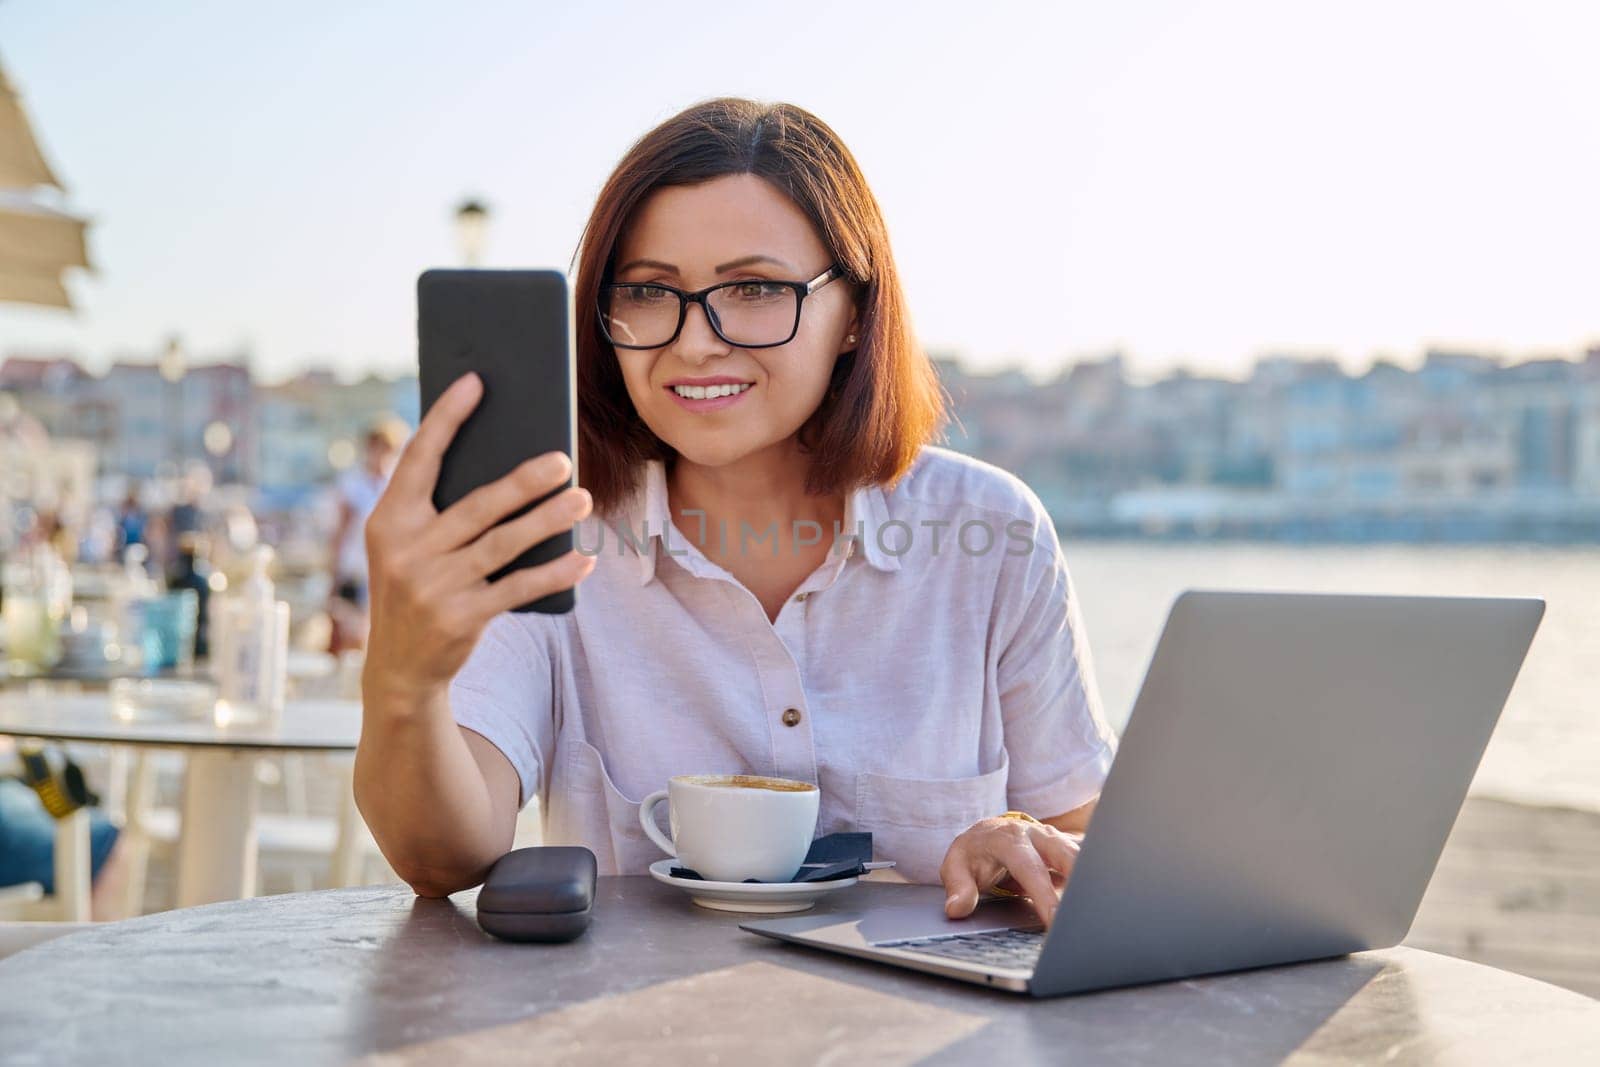 Smiling successful middle aged business woman sitting in outdoor cafe with cup of coffee using laptop and smart phone. Business, technology, freelance, remote work, 40s people concept